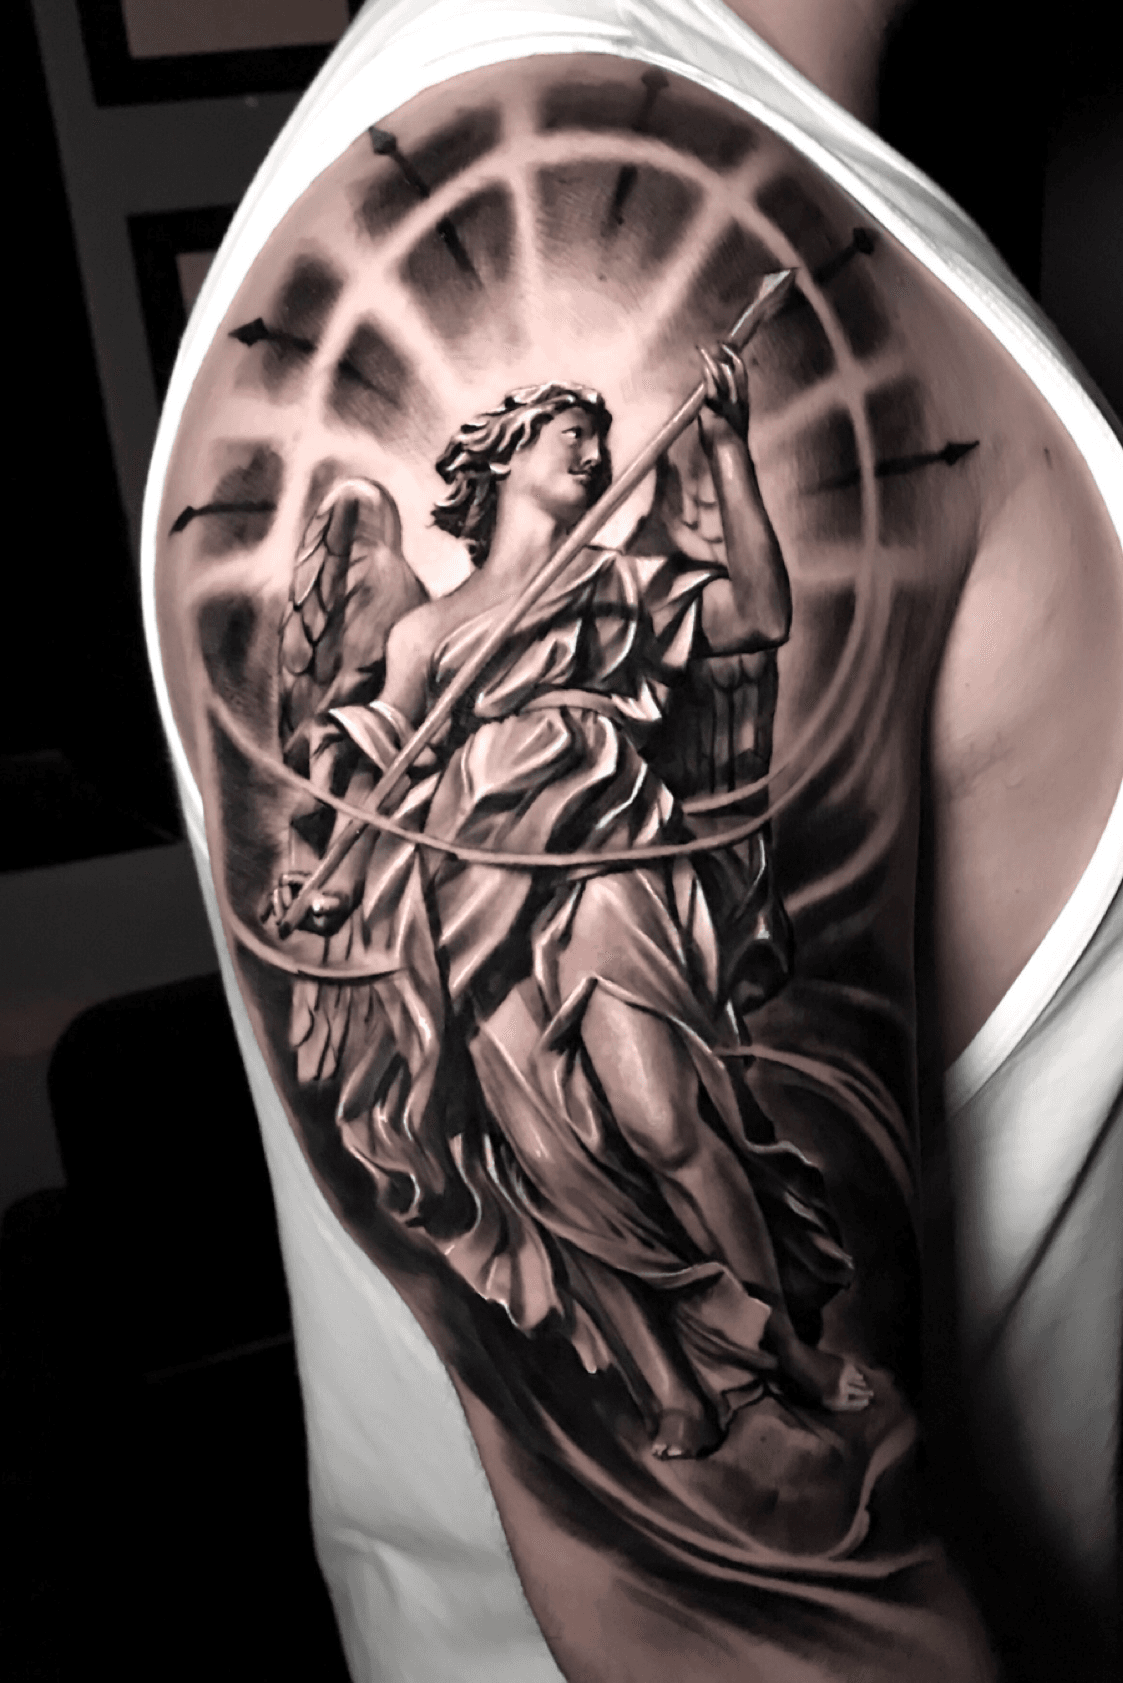 Black And Gray Tattoos And DesignsBlack And Gray Tattoo Ideas And Pictures   Warrior tattoos Angel tattoo designs Guardian angel tattoo designs